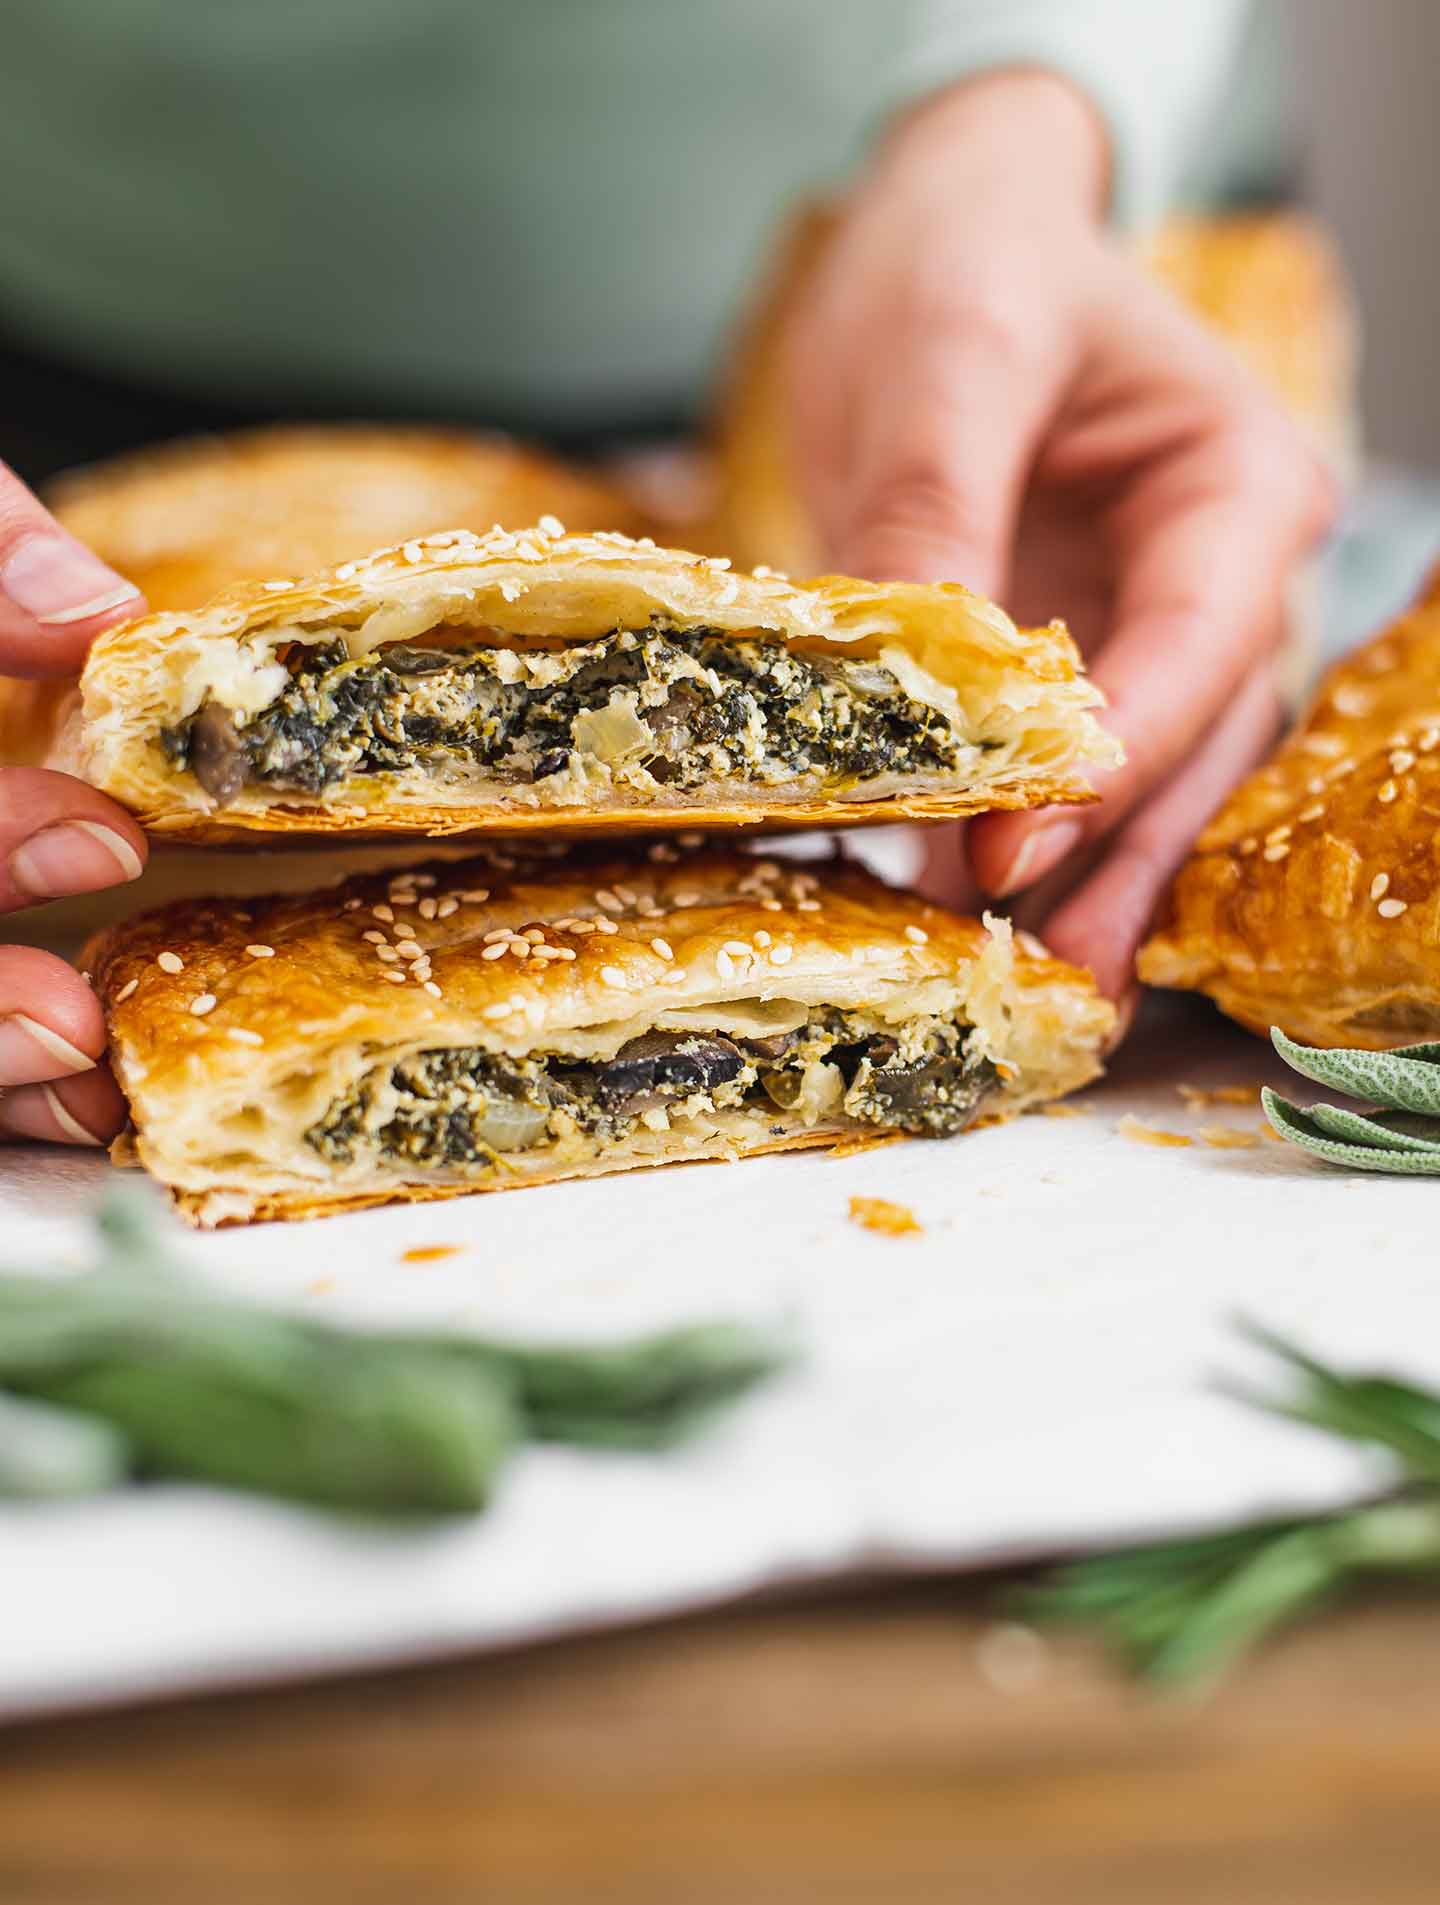 Side view of a puff pastry pocket sliced in half and stacked one half on the other. The warm spinach, mushroom, tofu ricotta mixture is visible within the flaky pastry.